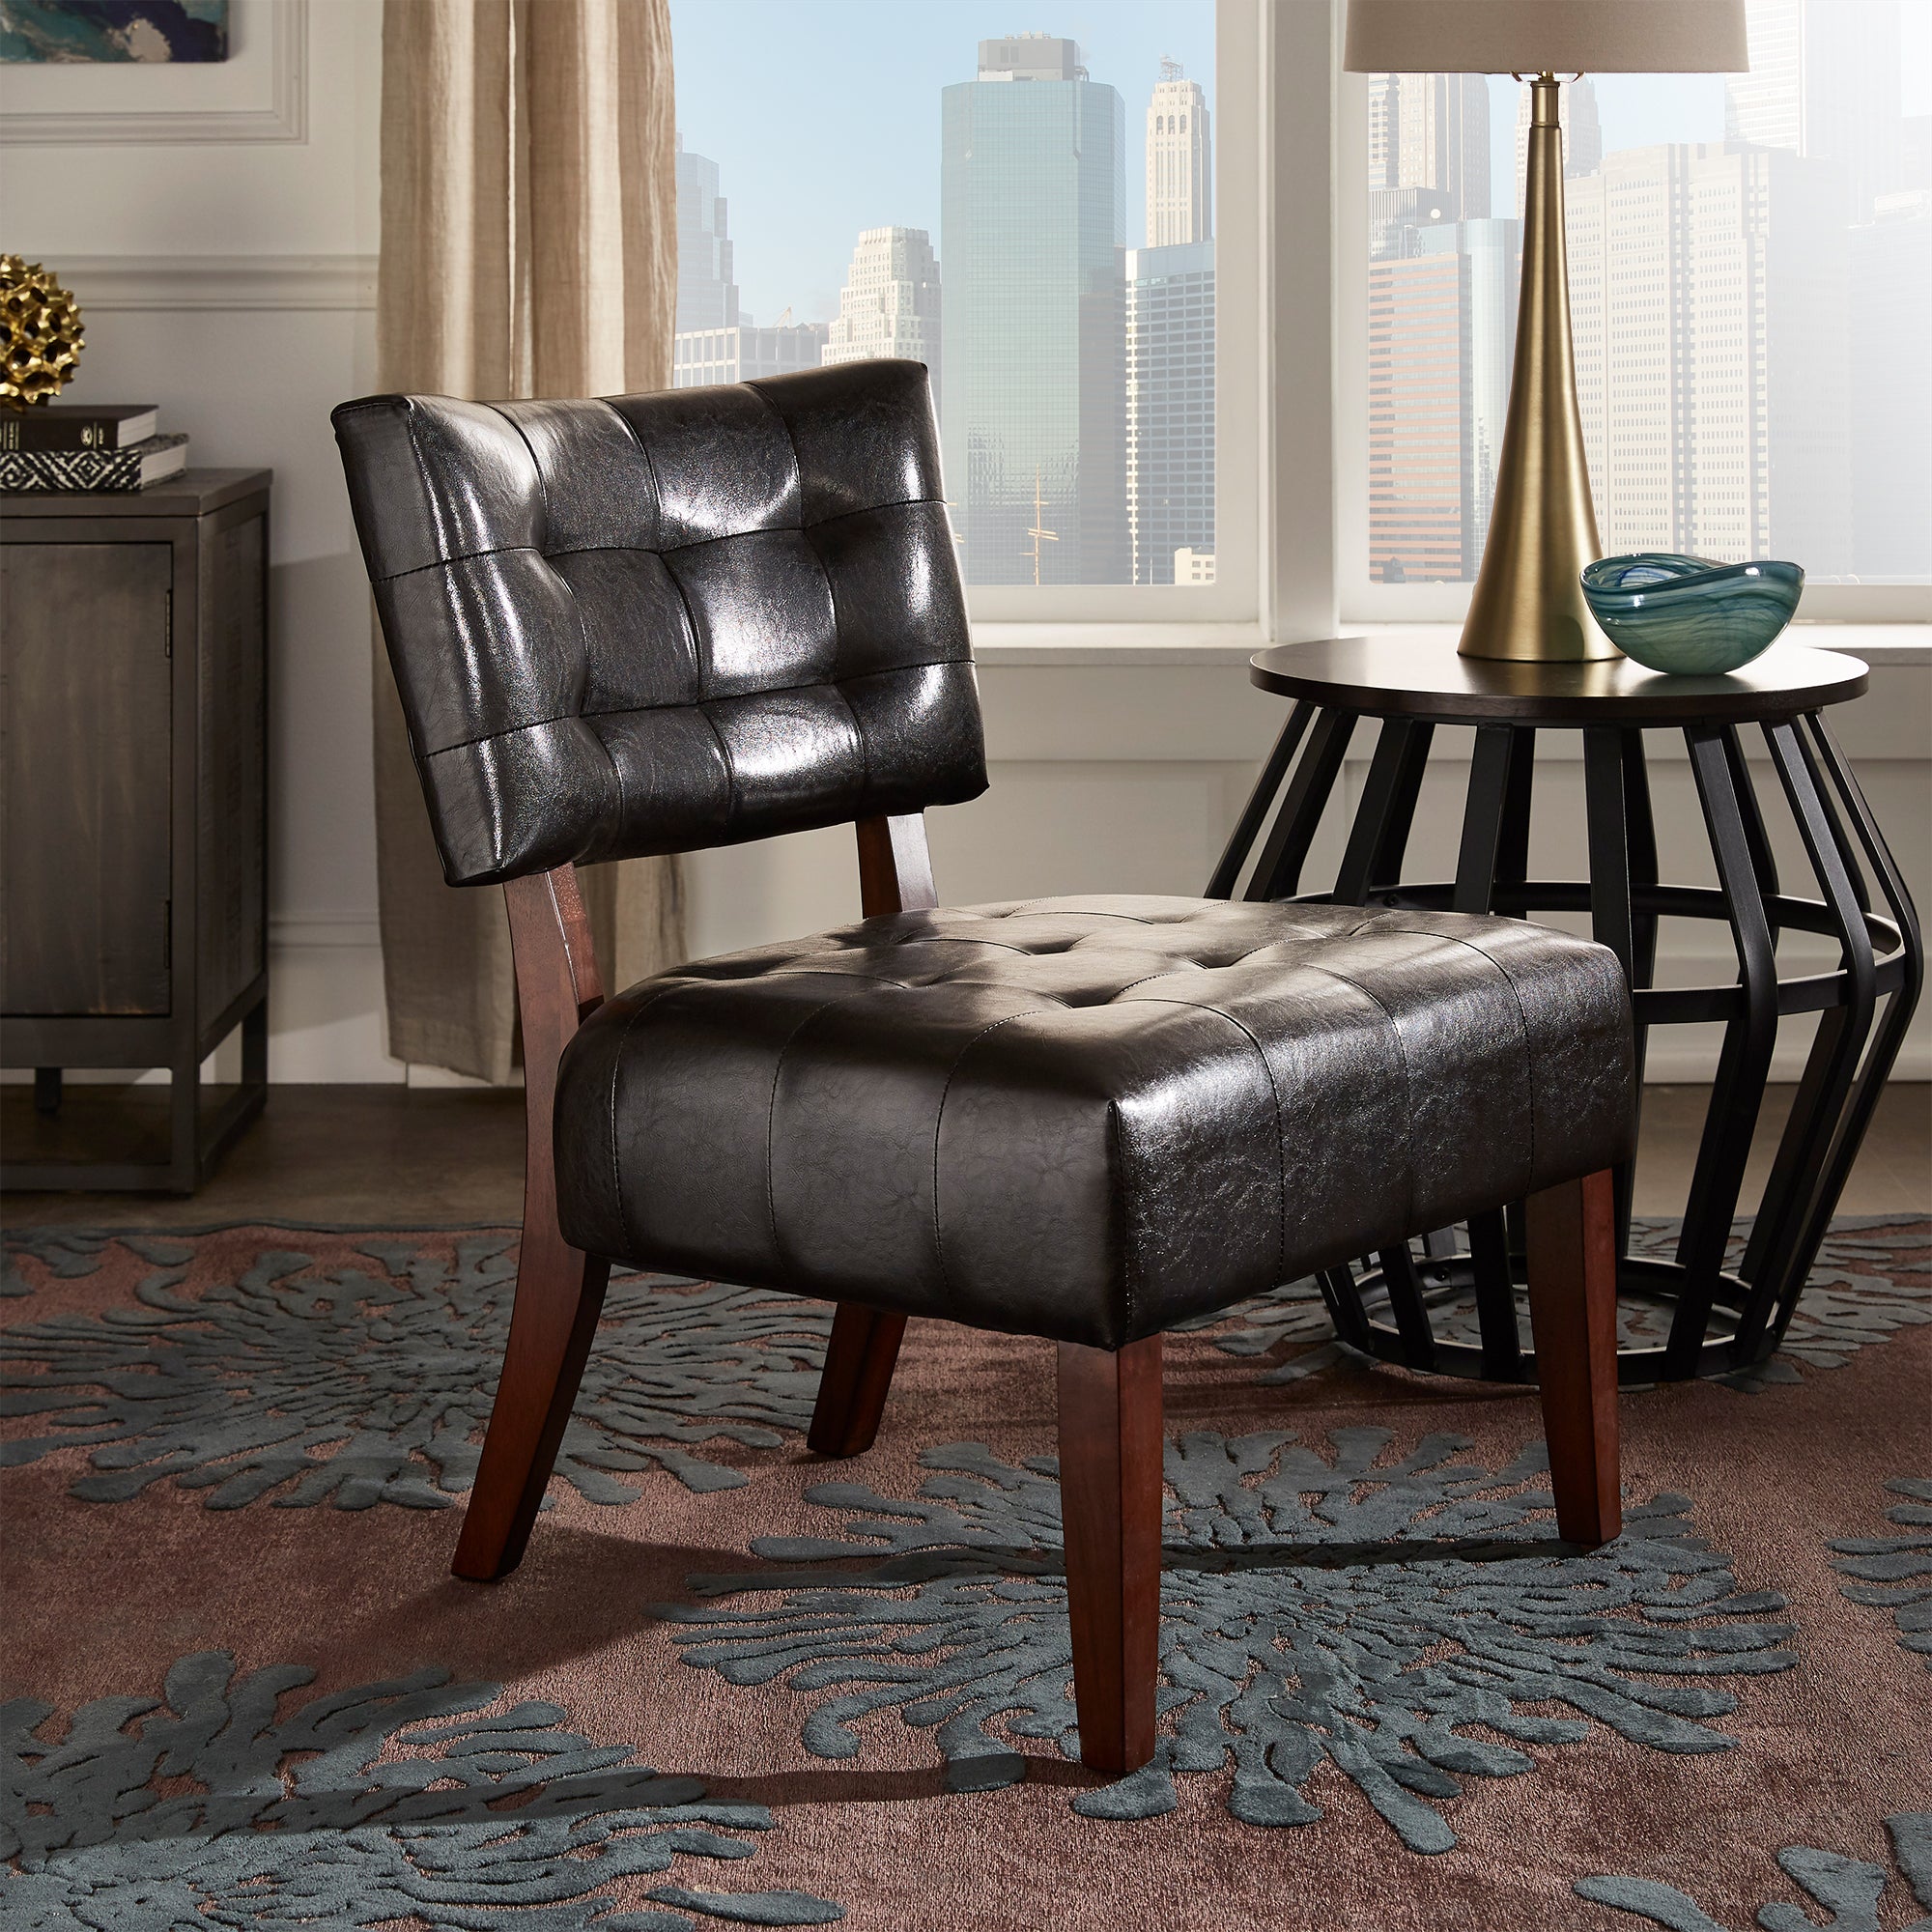 Cowhide Fabric Accent Chair - Black Cowhide Print by Inspire Q Bold